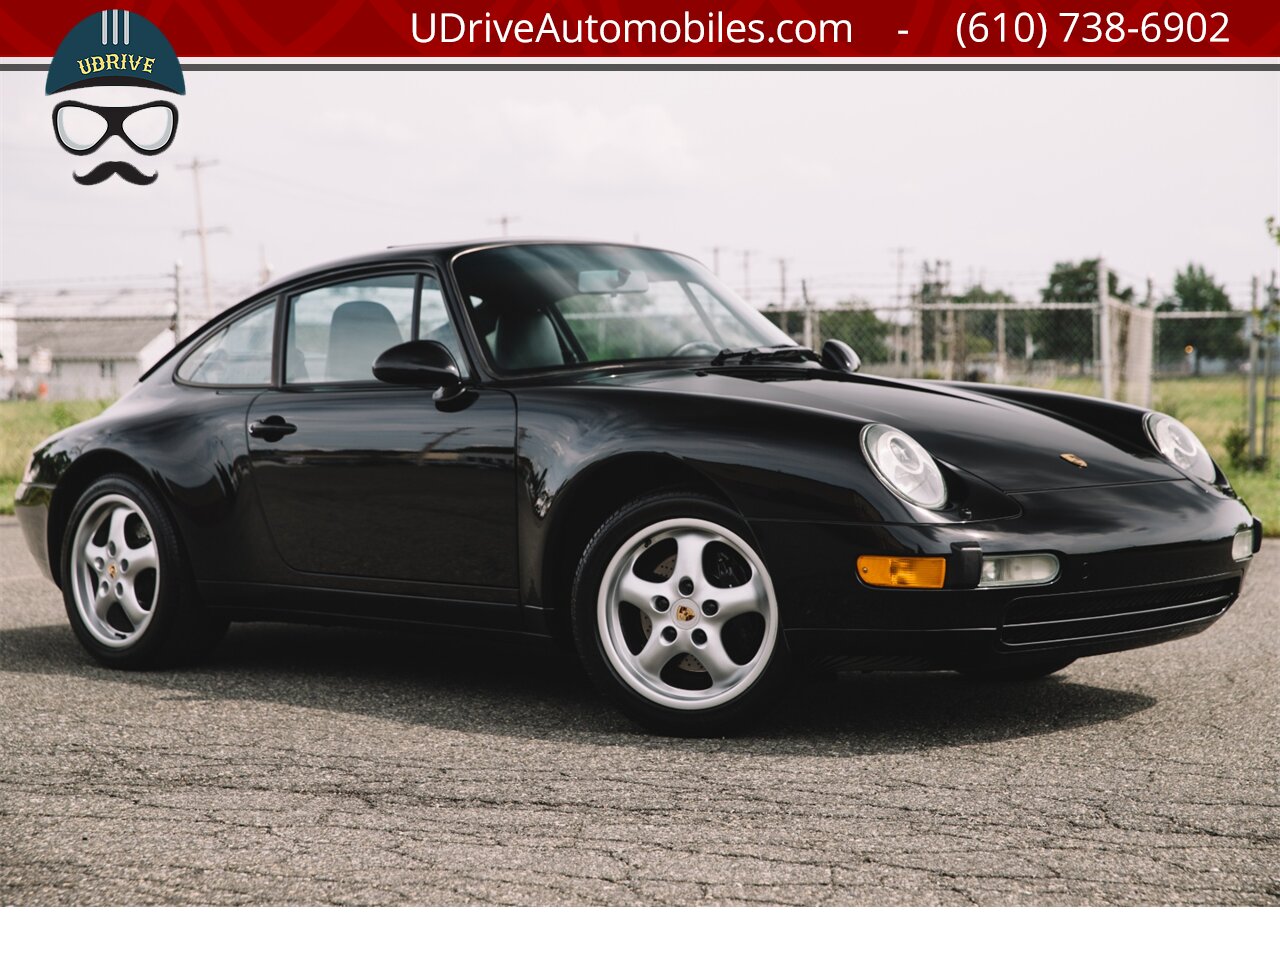 1995 Porsche 911 993 Carrera 6 Speed 16k Miles Service History  Black over Black Spectacular Stock Example 1 Owner Clean Carfax - Photo 3 - West Chester, PA 19382